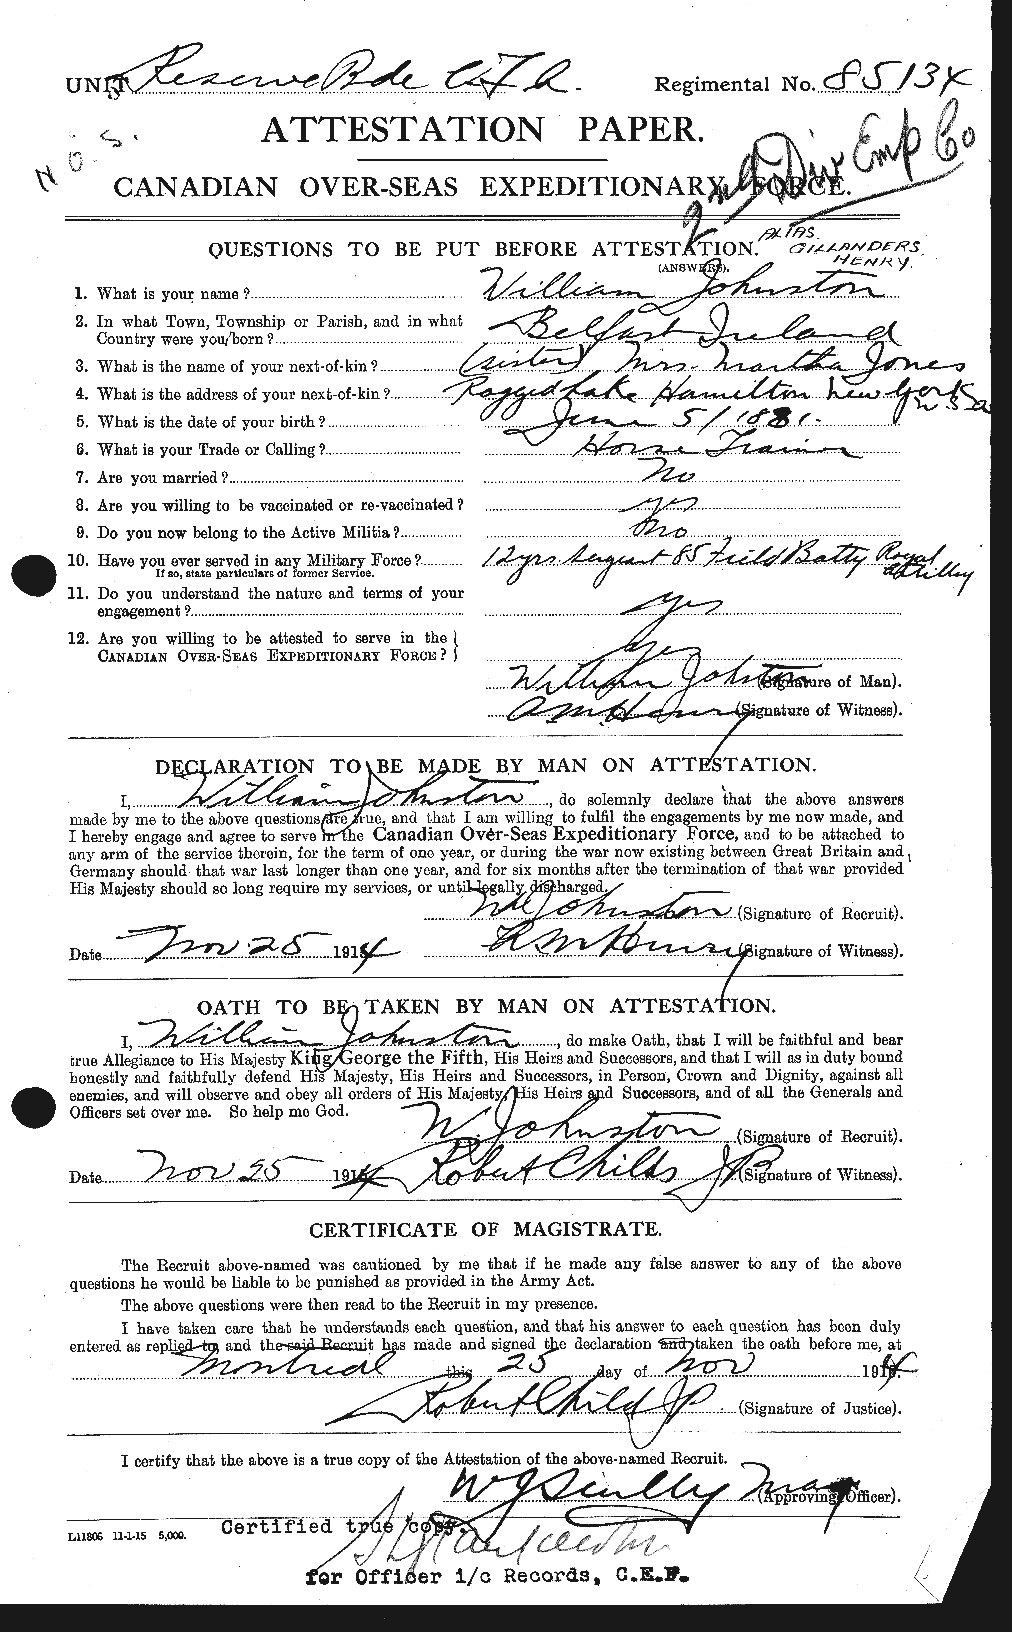 Personnel Records of the First World War - CEF 348676a